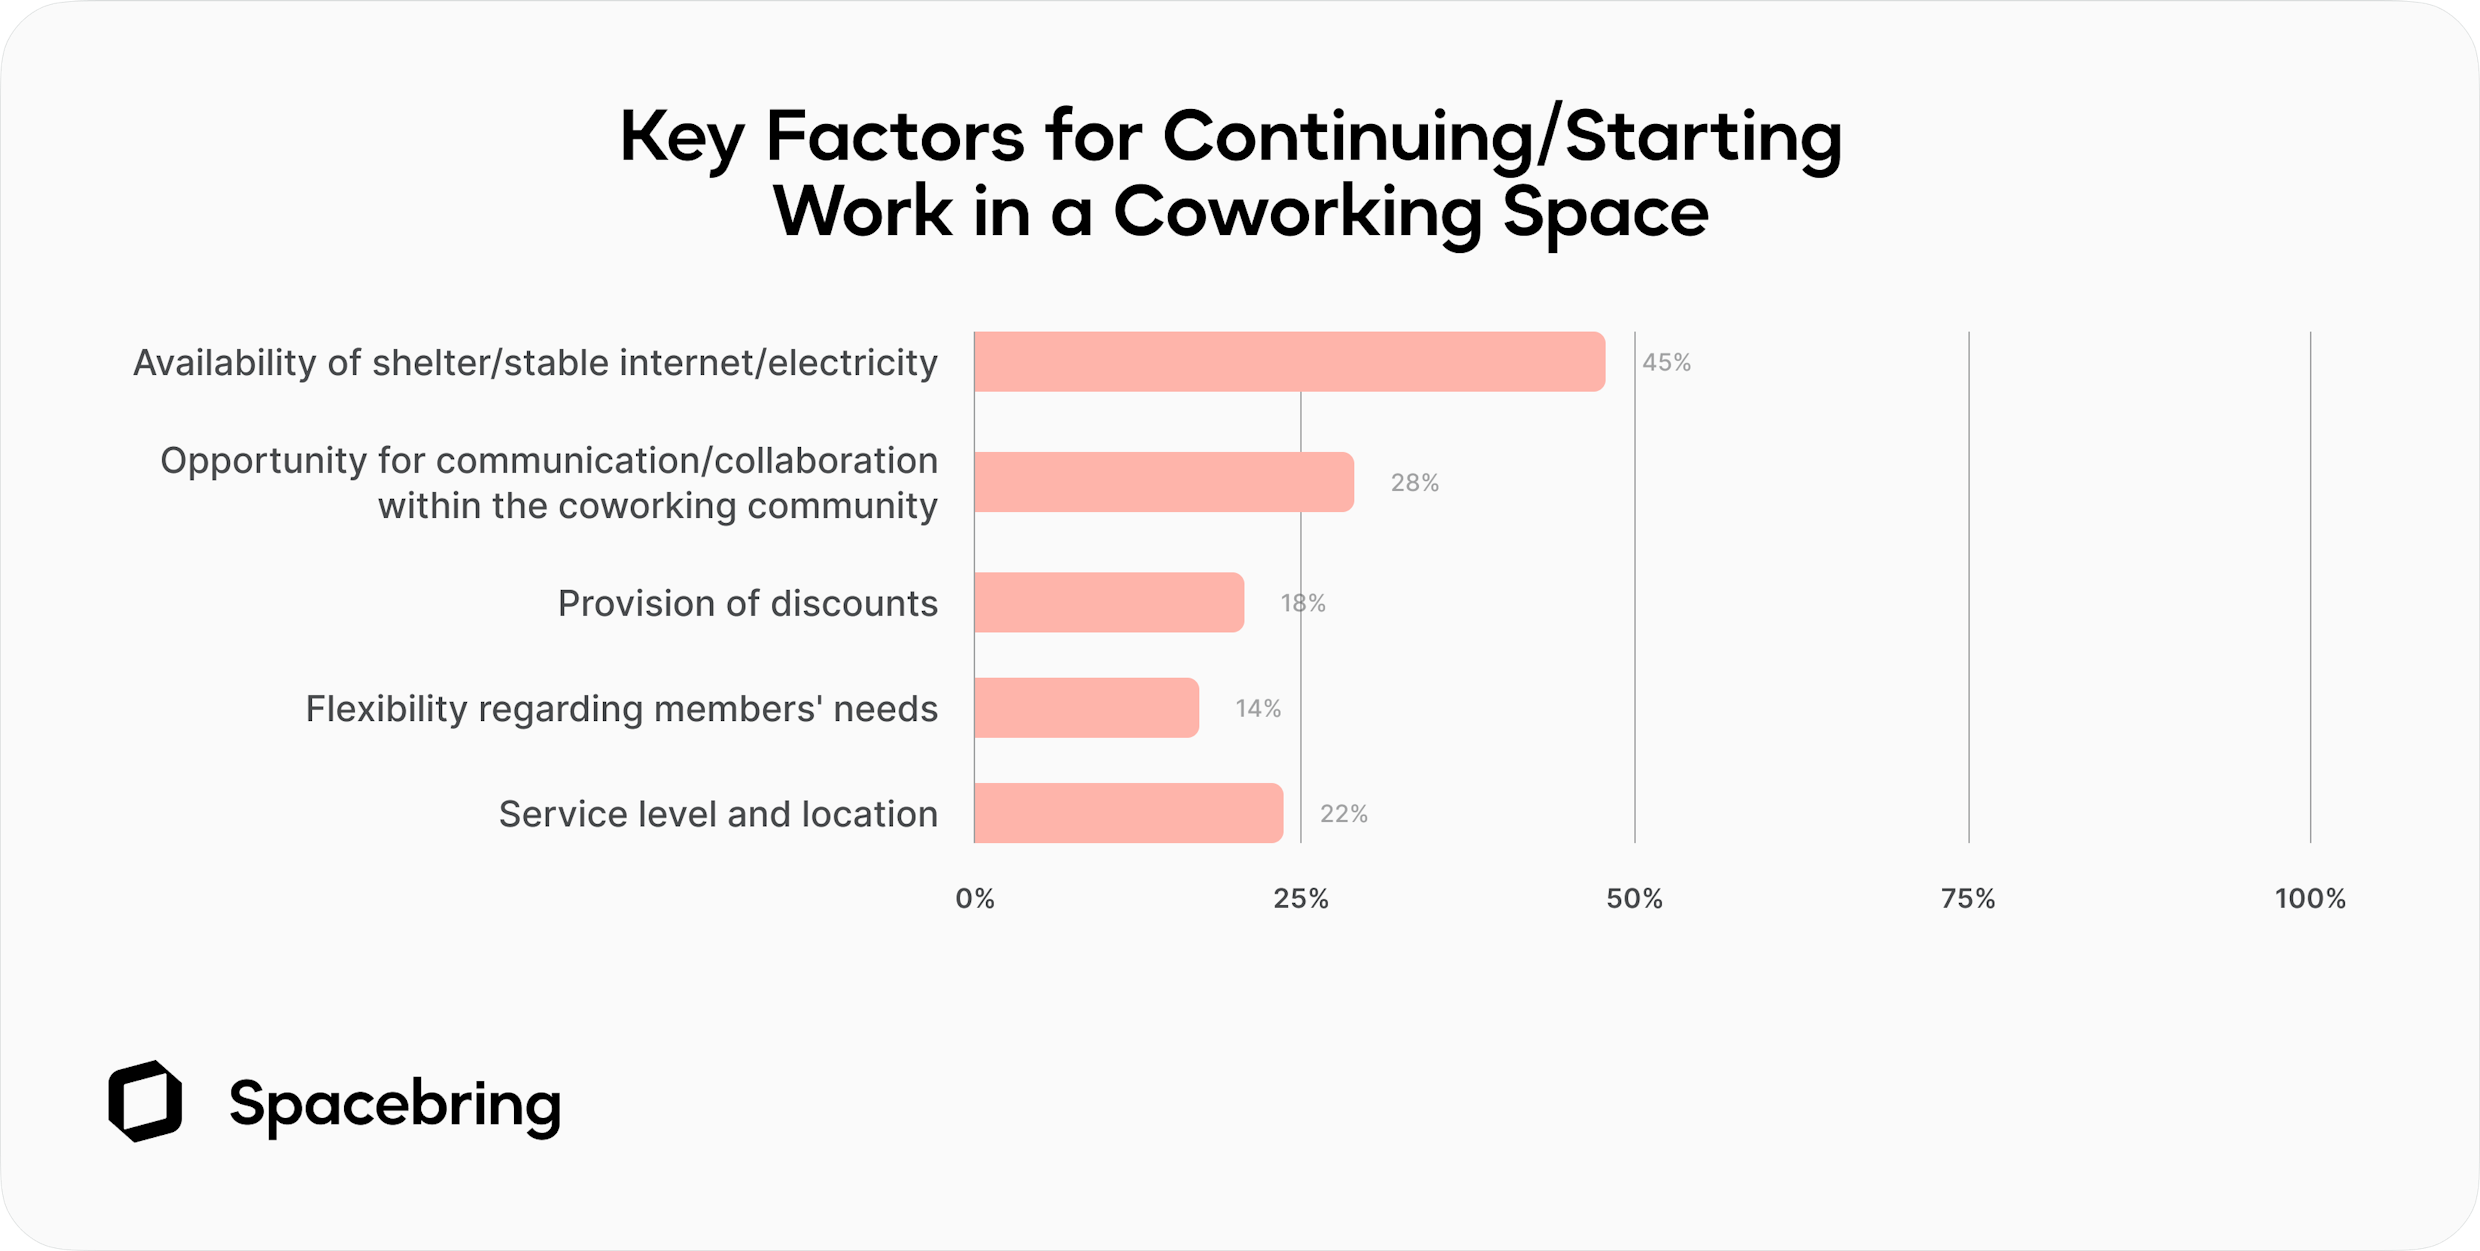 Key factors for continuing/starting work in a coworking space - Spacebring survey